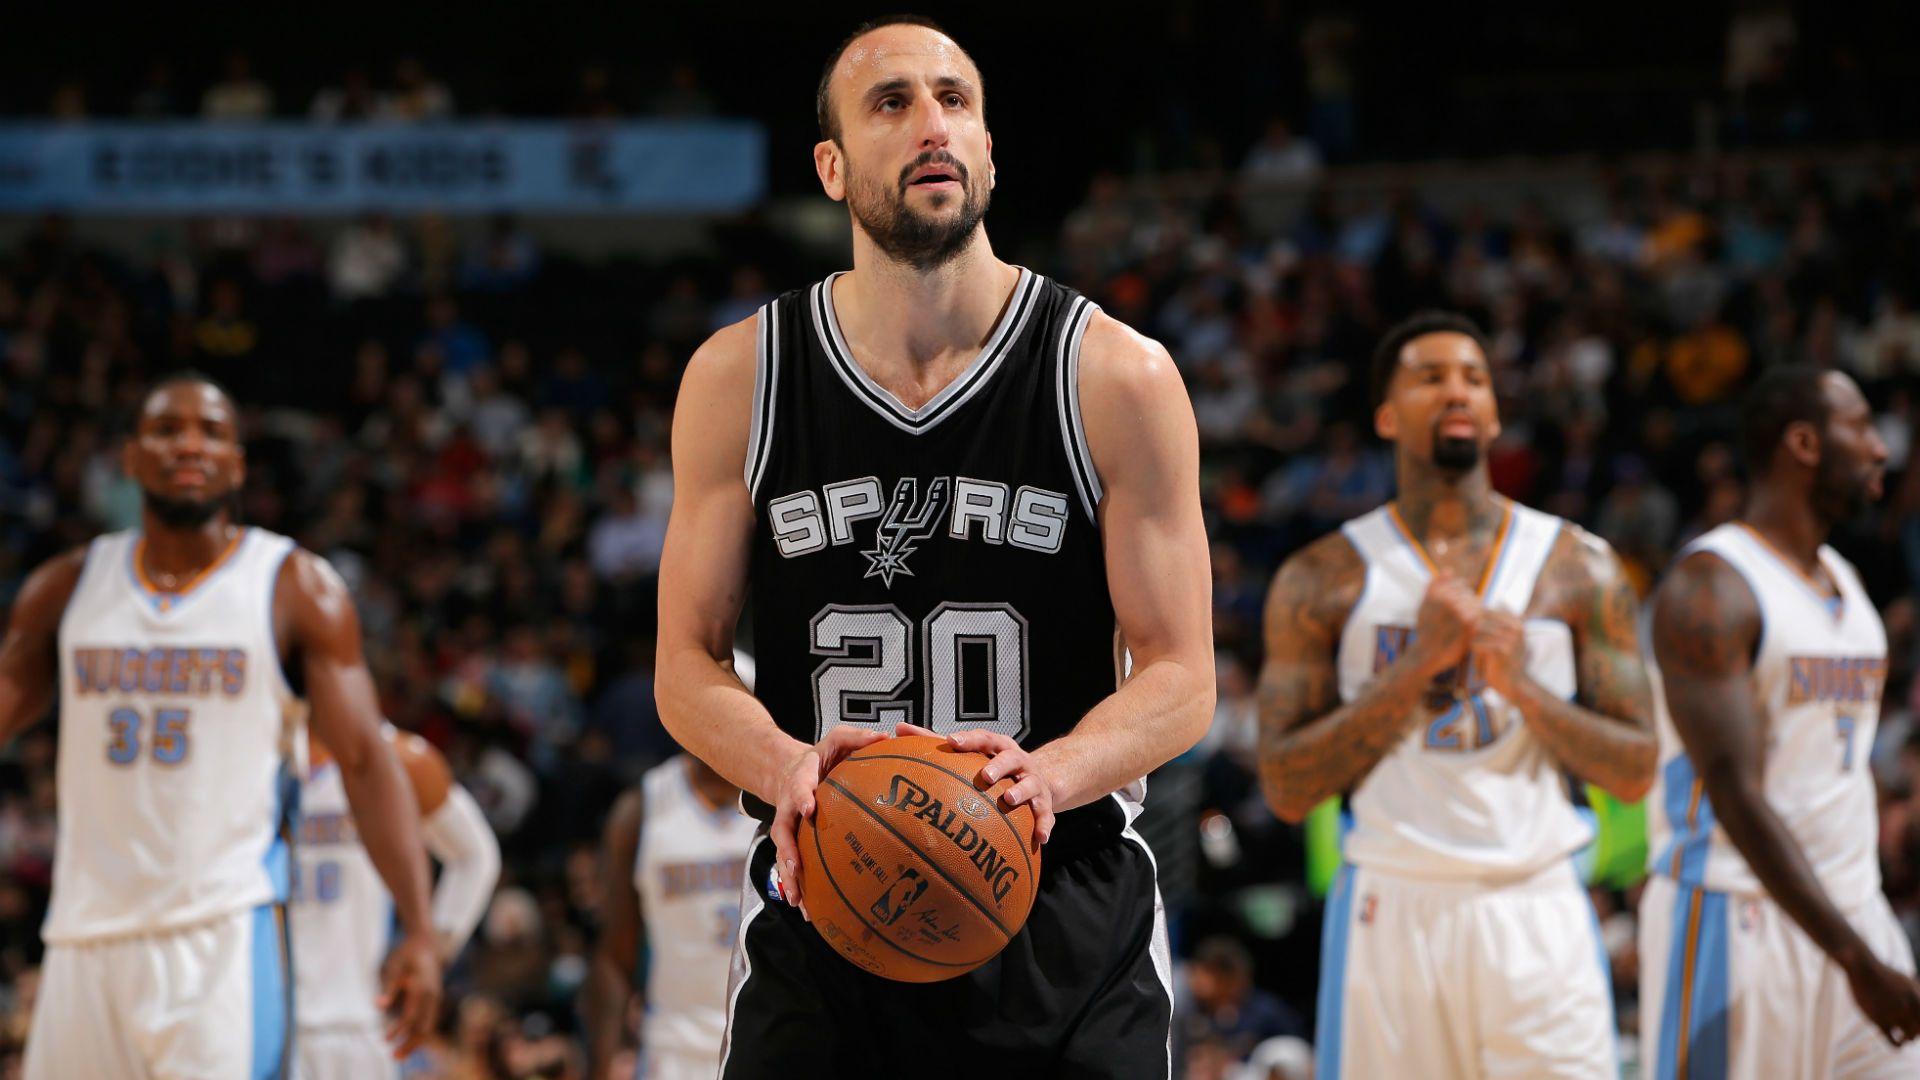 After years of small deals, Spurs finally show Manu the money